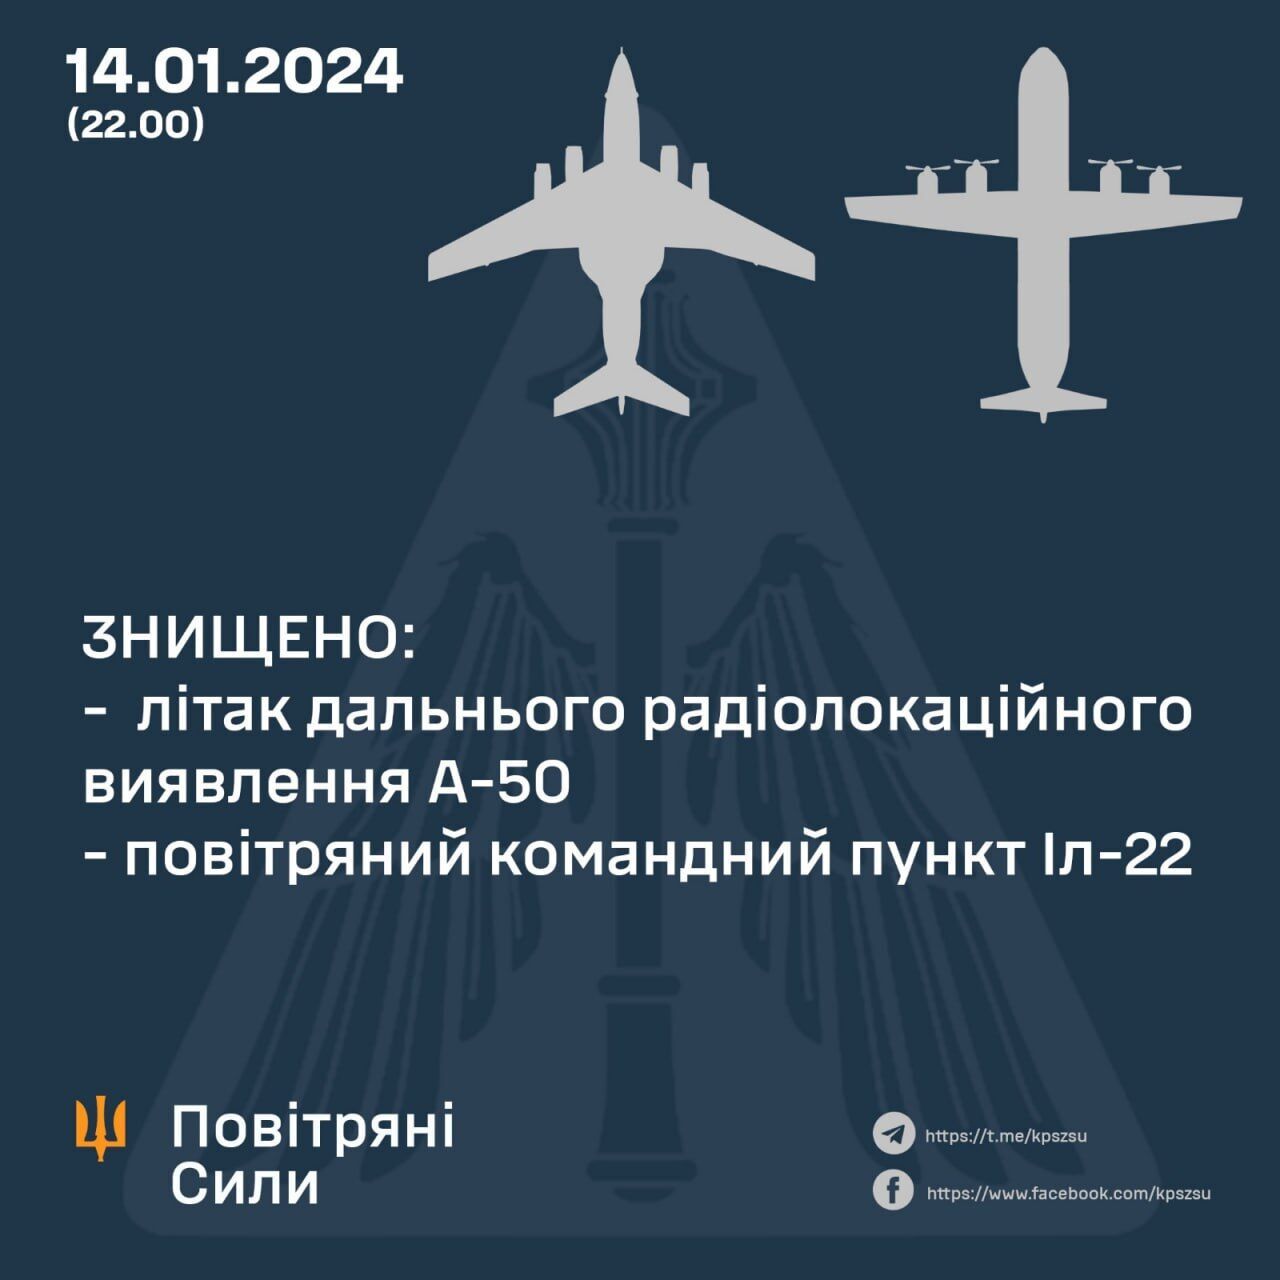 Zaluzhny confirms destruction of enemy A-50 and Il-22 by Ukrainian Air Force and thanks for the operation